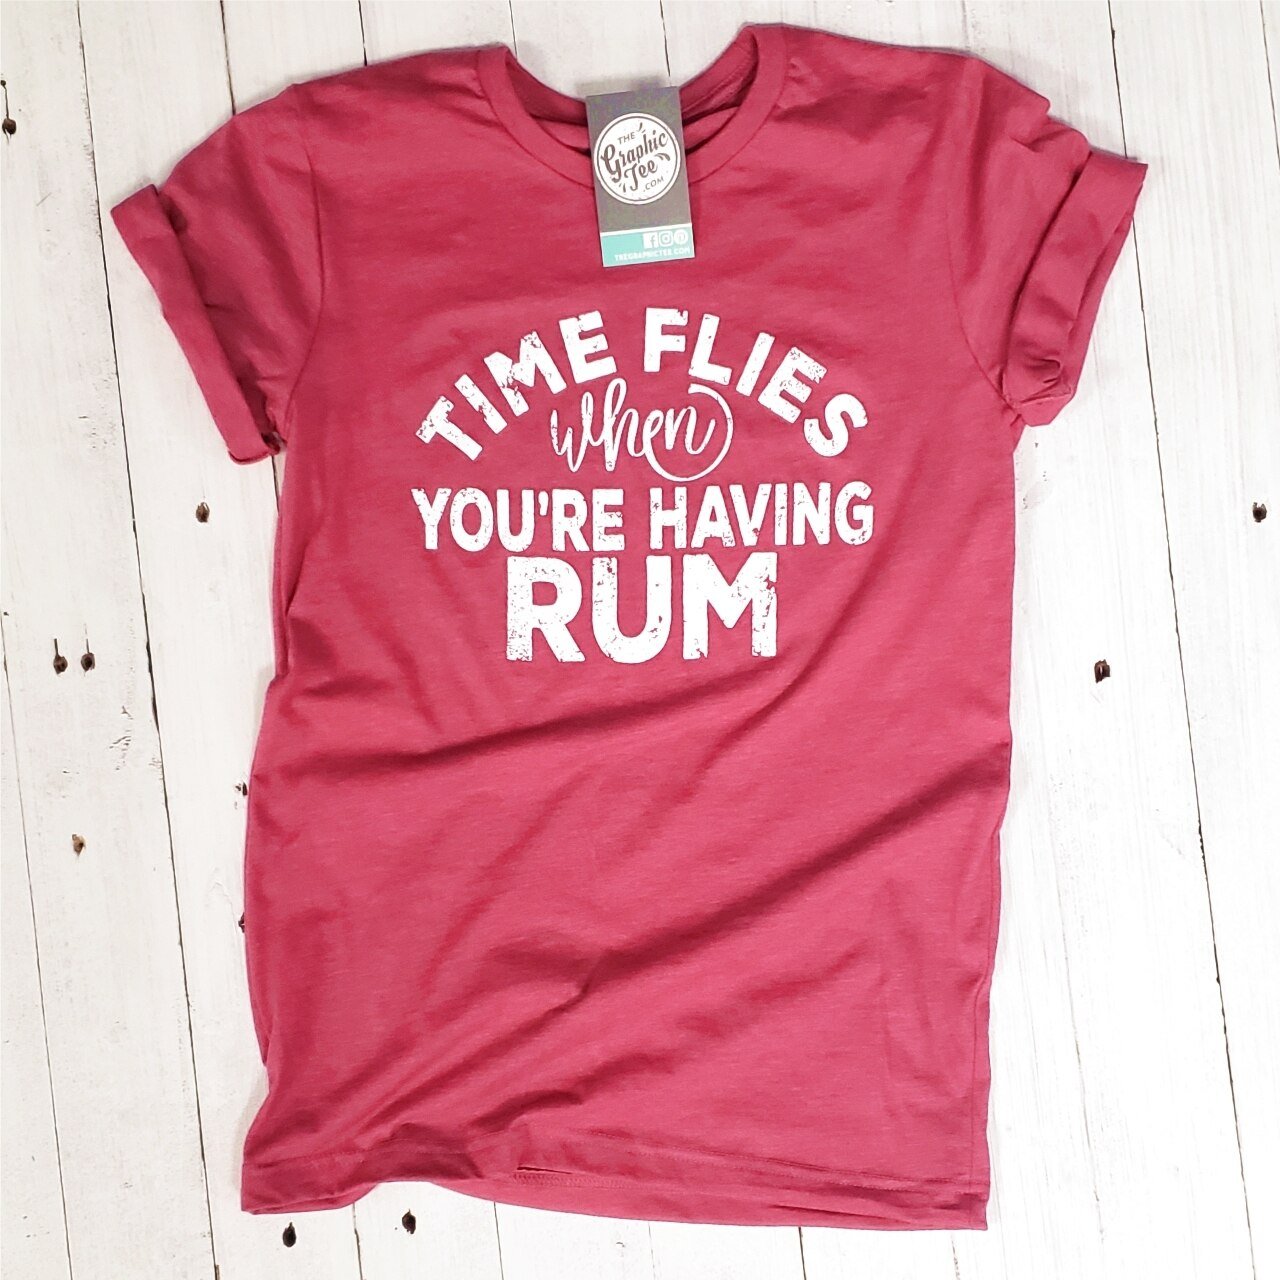 Time Flies When You're Having Rum - Unisex Tee - The Graphic Tee